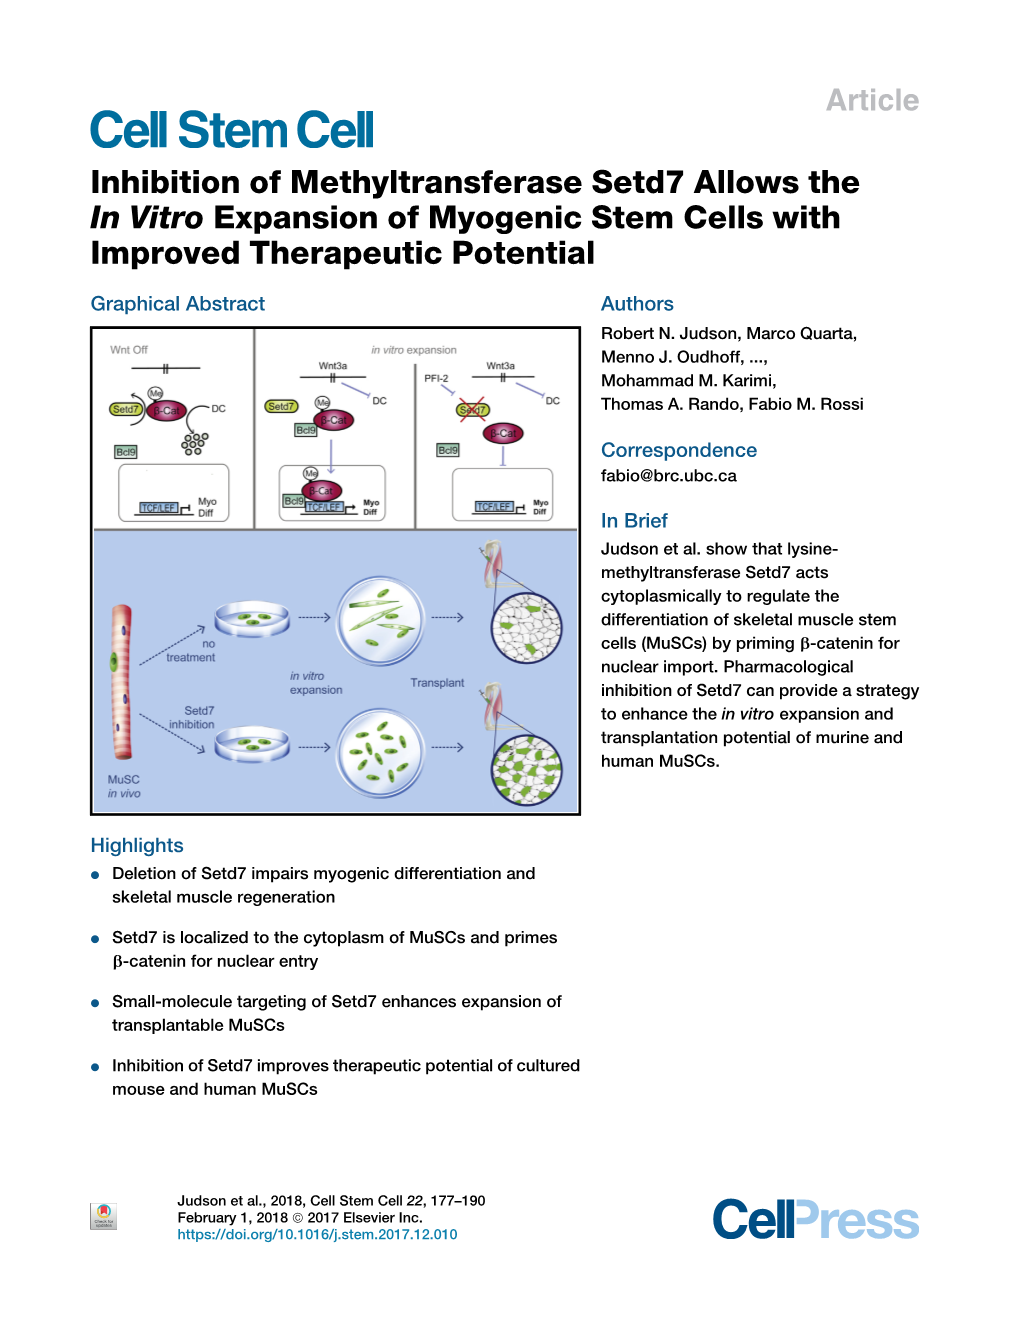 Inhibition of Methyltransferase Setd7 Allows the in Vitro Expansion of Myogenic Stem Cells with Improved Therapeutic Potential